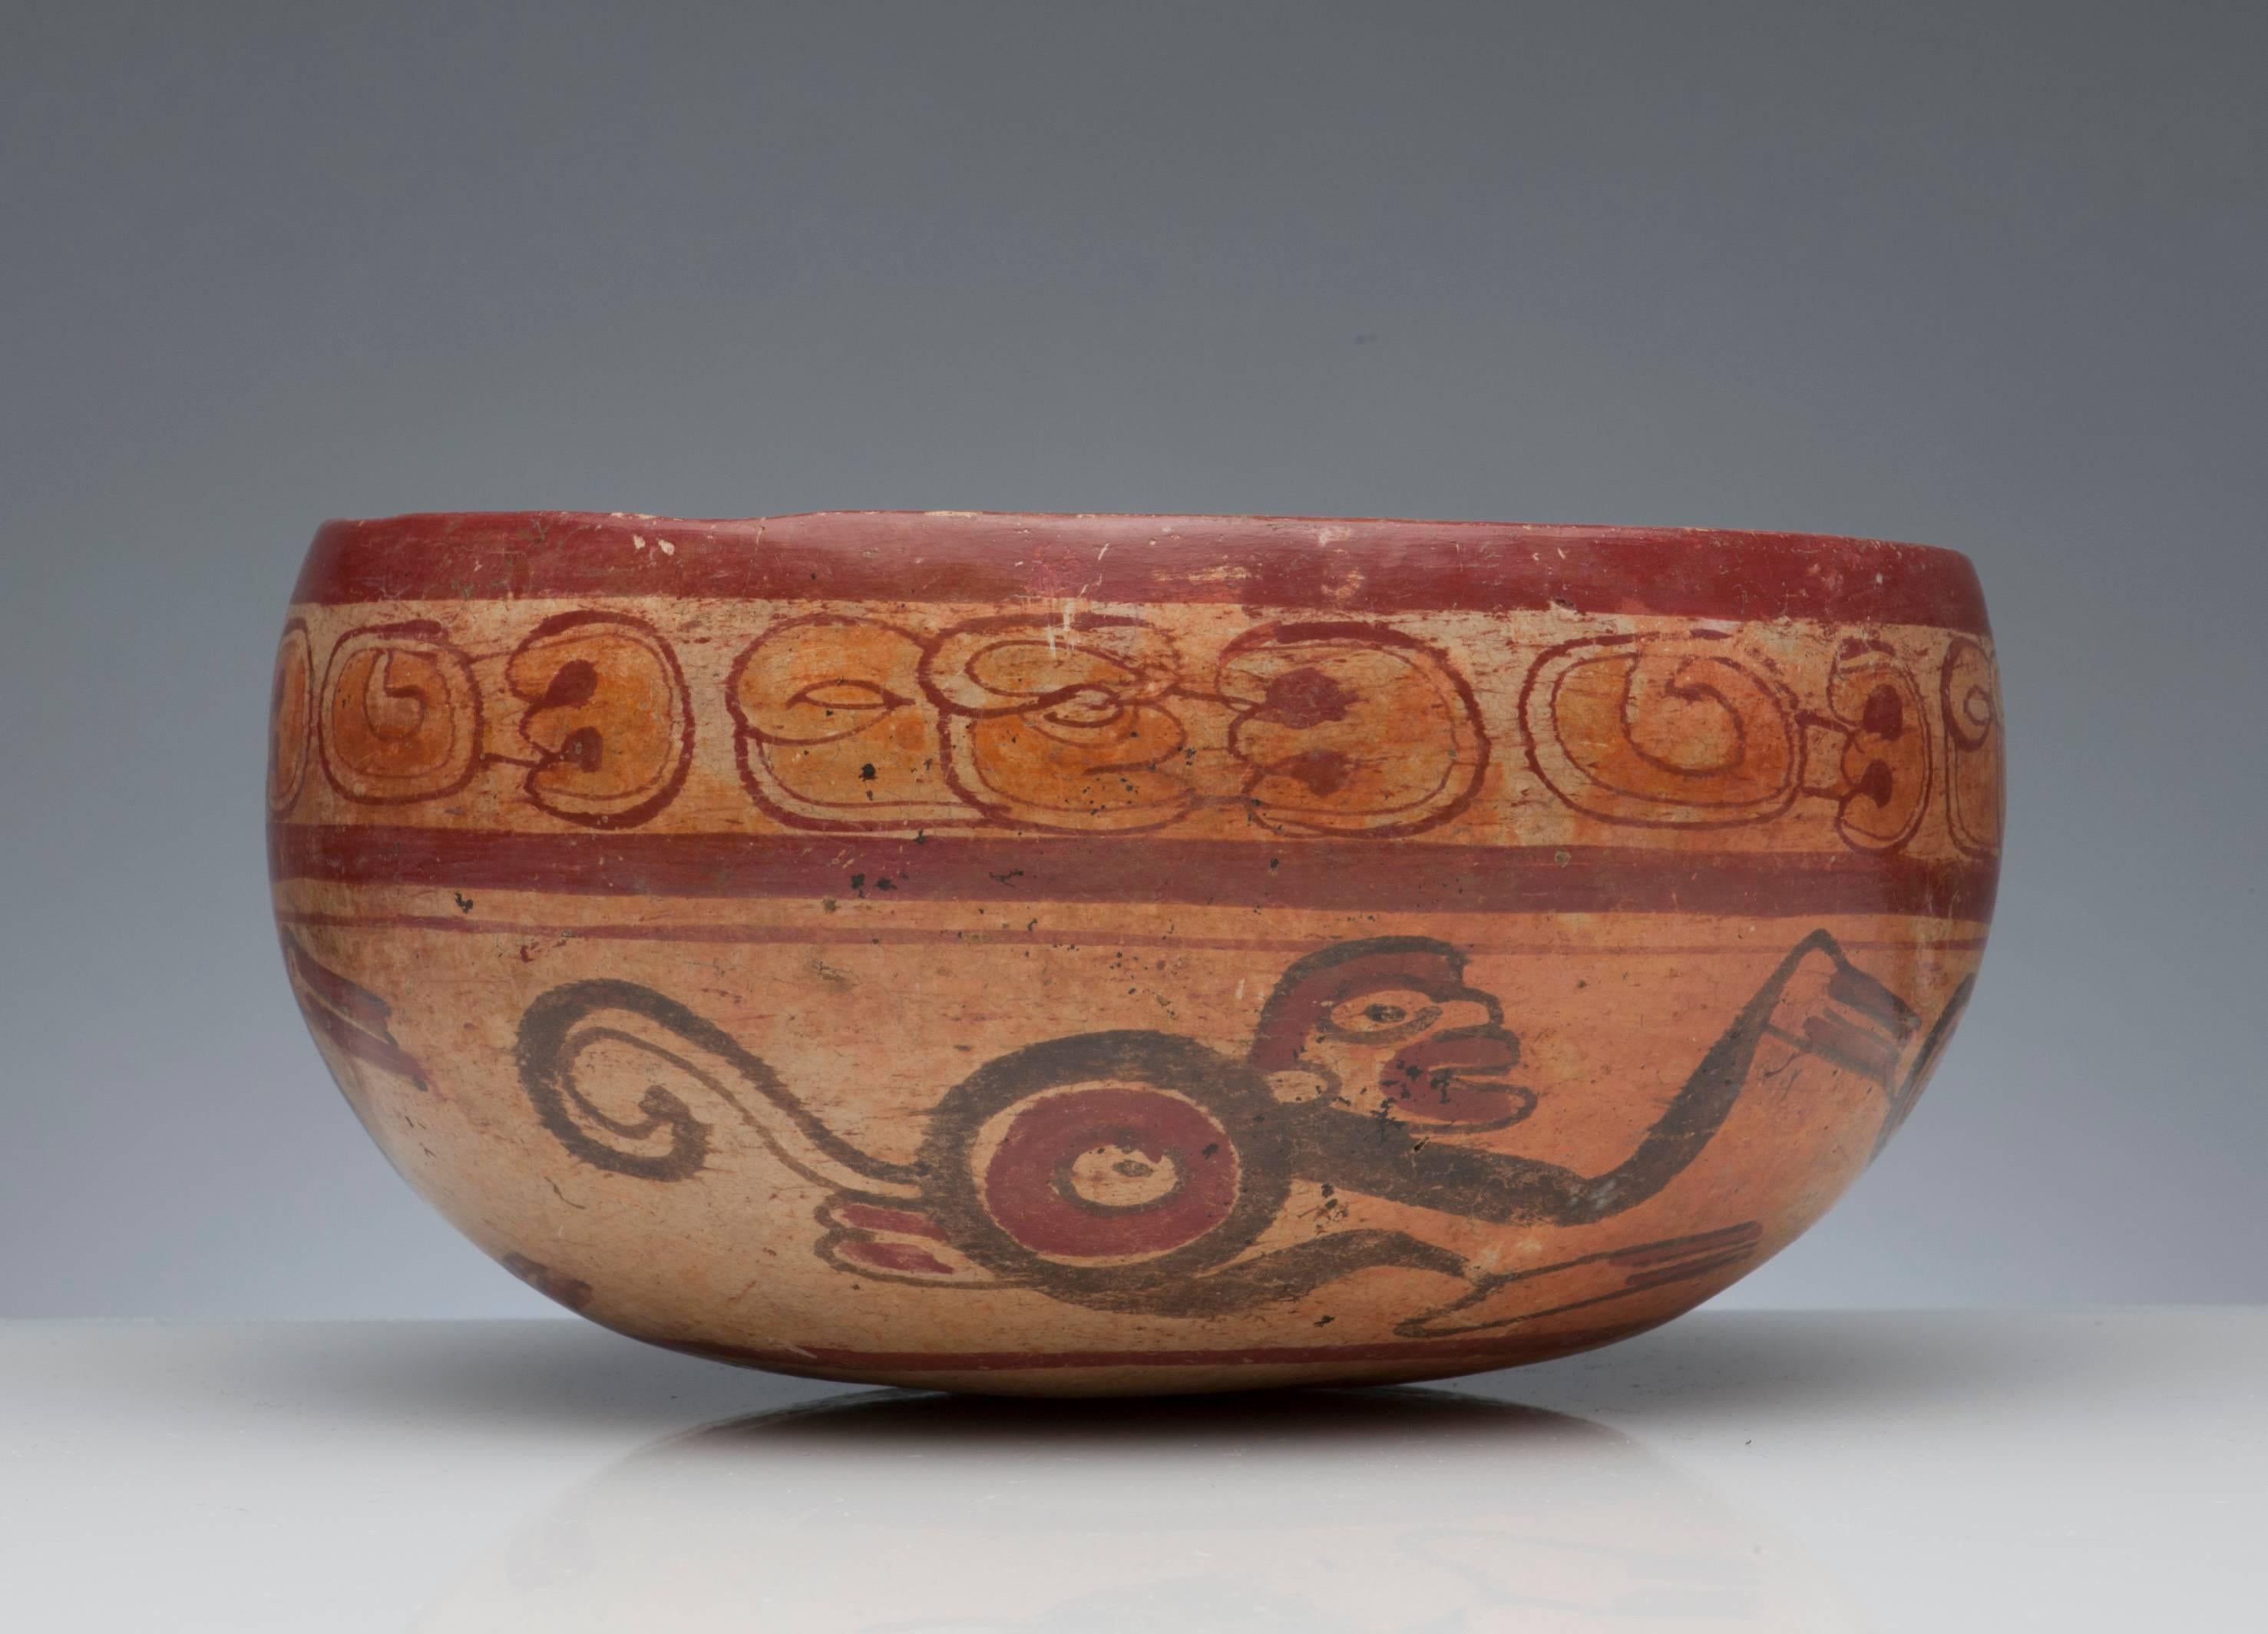 A fine Pre-Columbian Maya bowl, circa 600-900 A.D. Decorated with nicely detailed monkey's and painted glyphs. Measures 7.5 inches in diameter and 3.75 inches high.